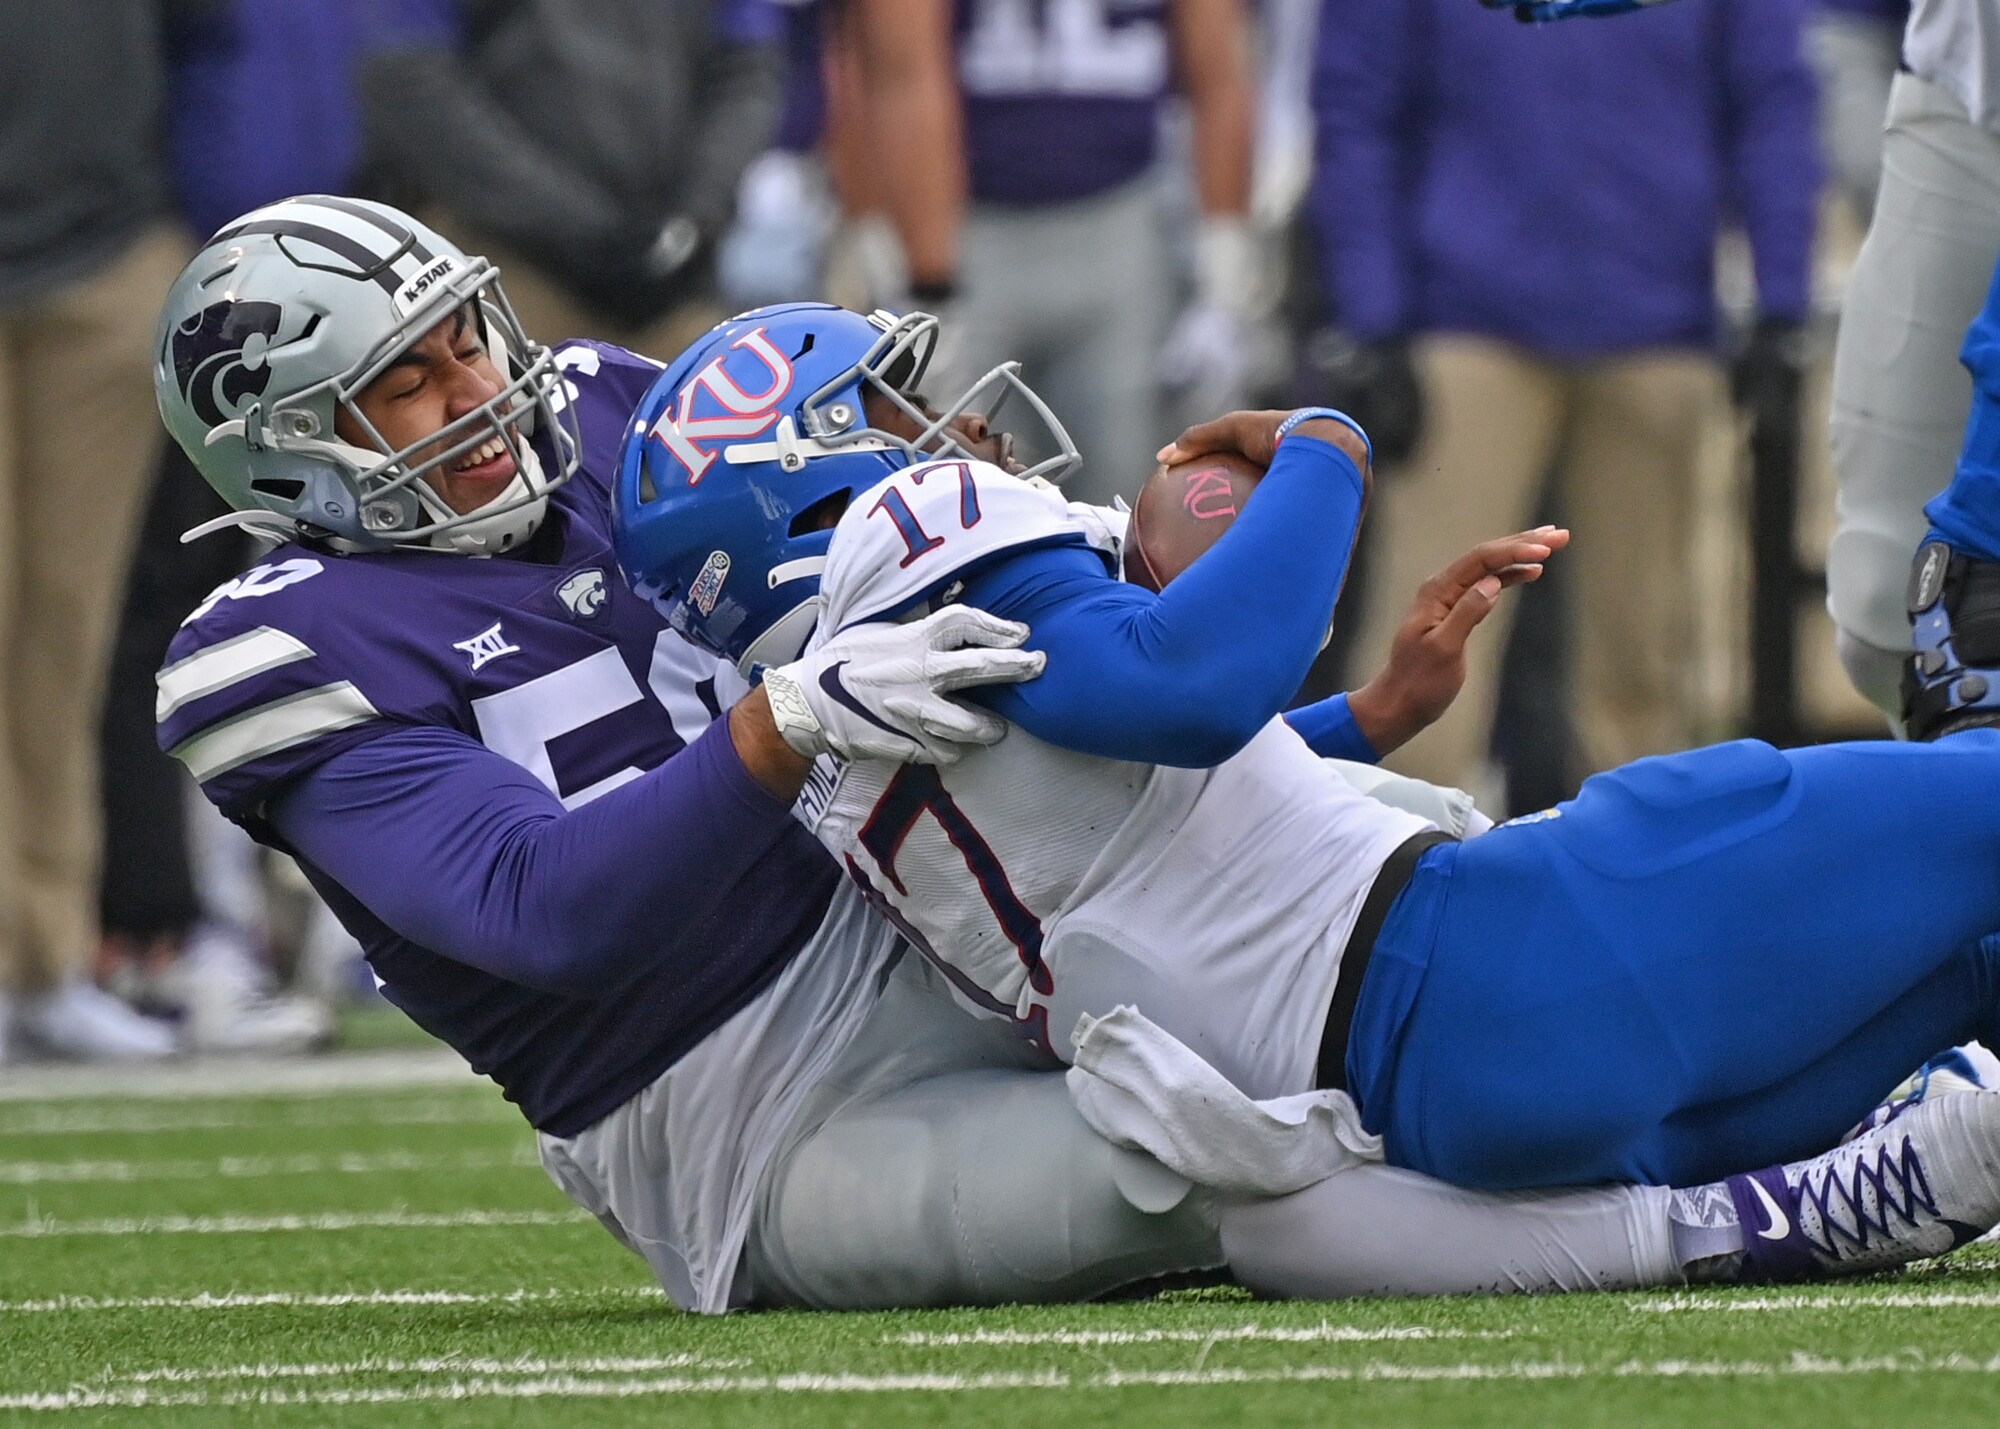 Kansas State defender Tyrone Taleni was sacked by Kansas midfielder Jalon Daniels during a game in October 2020.